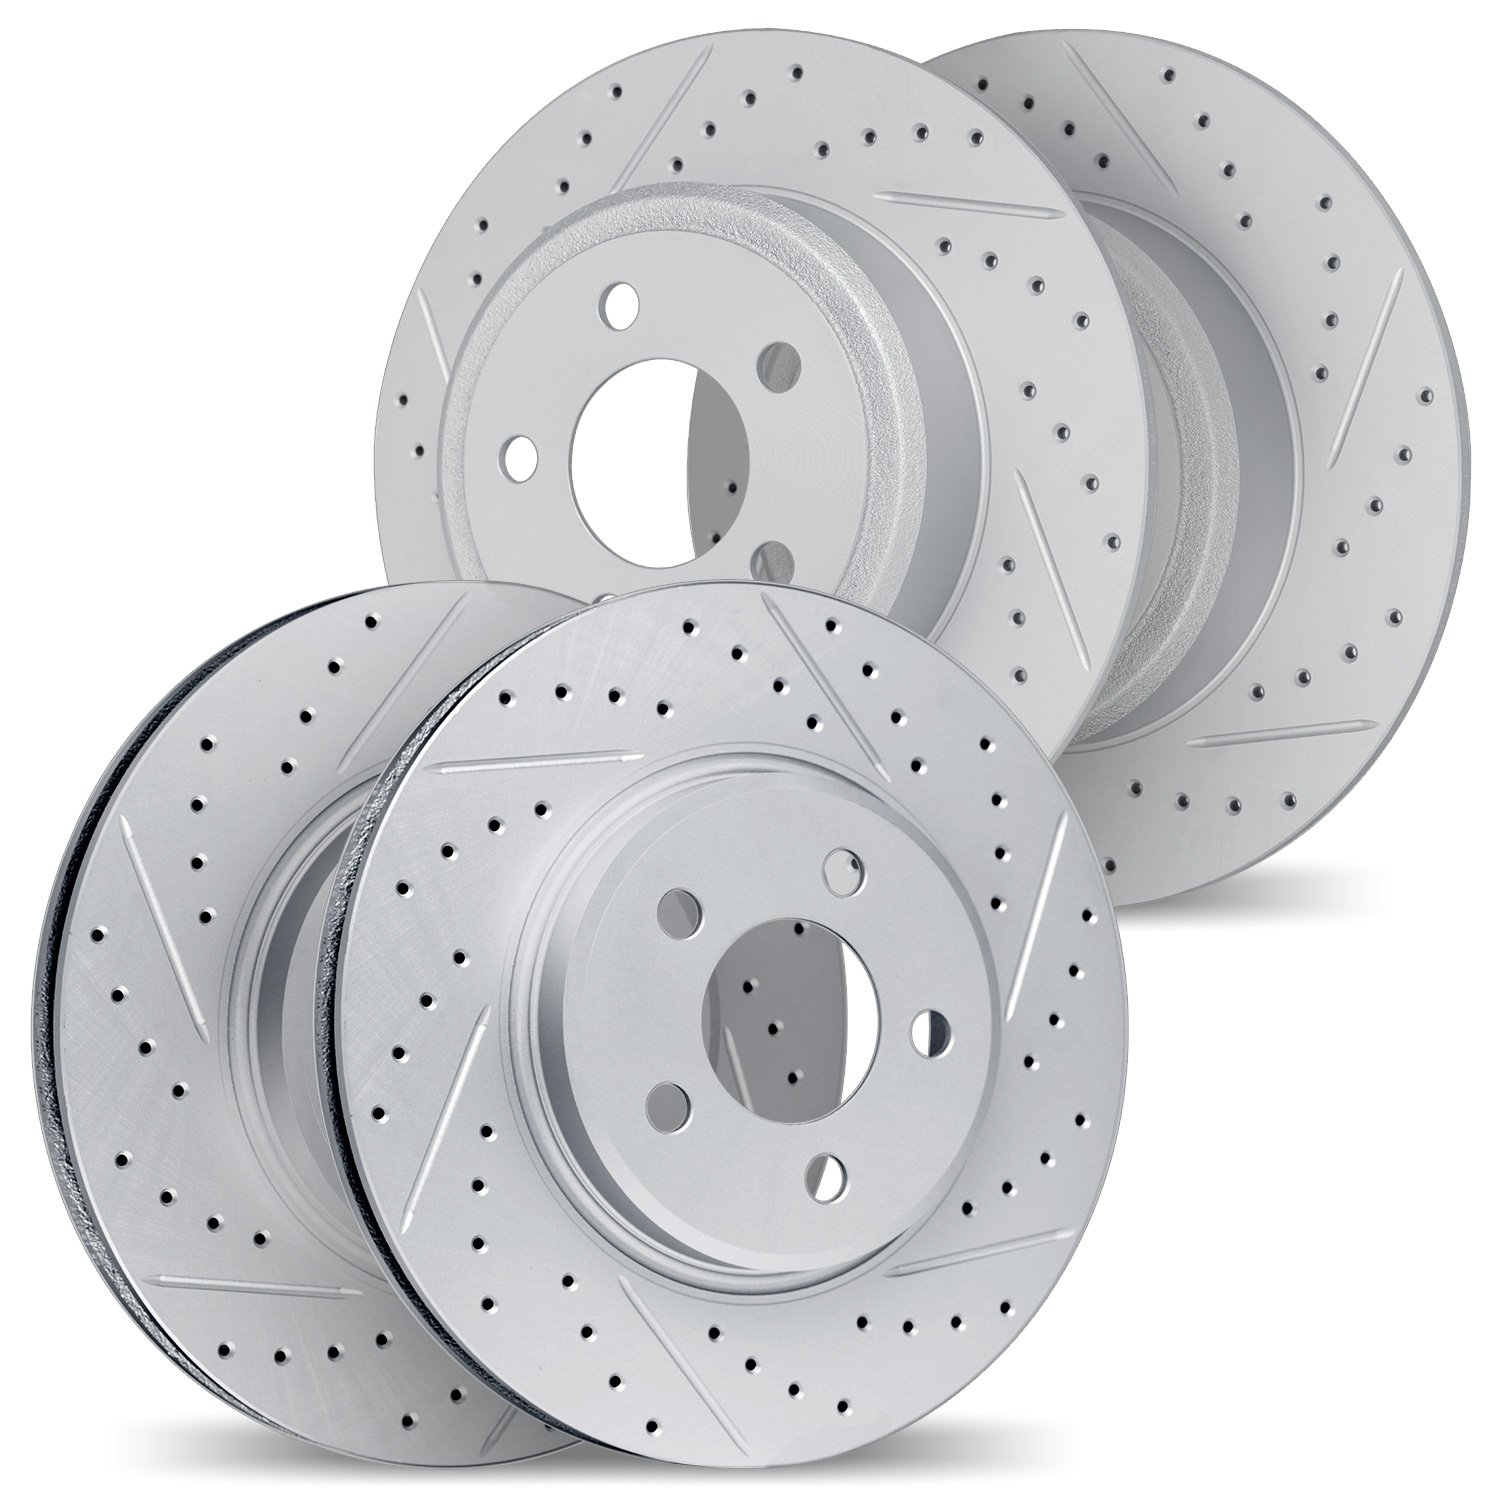 2004-27010 Geoperformance Drilled/Slotted Brake Rotors, 2004-2013 Volvo, Position: Front and Rear